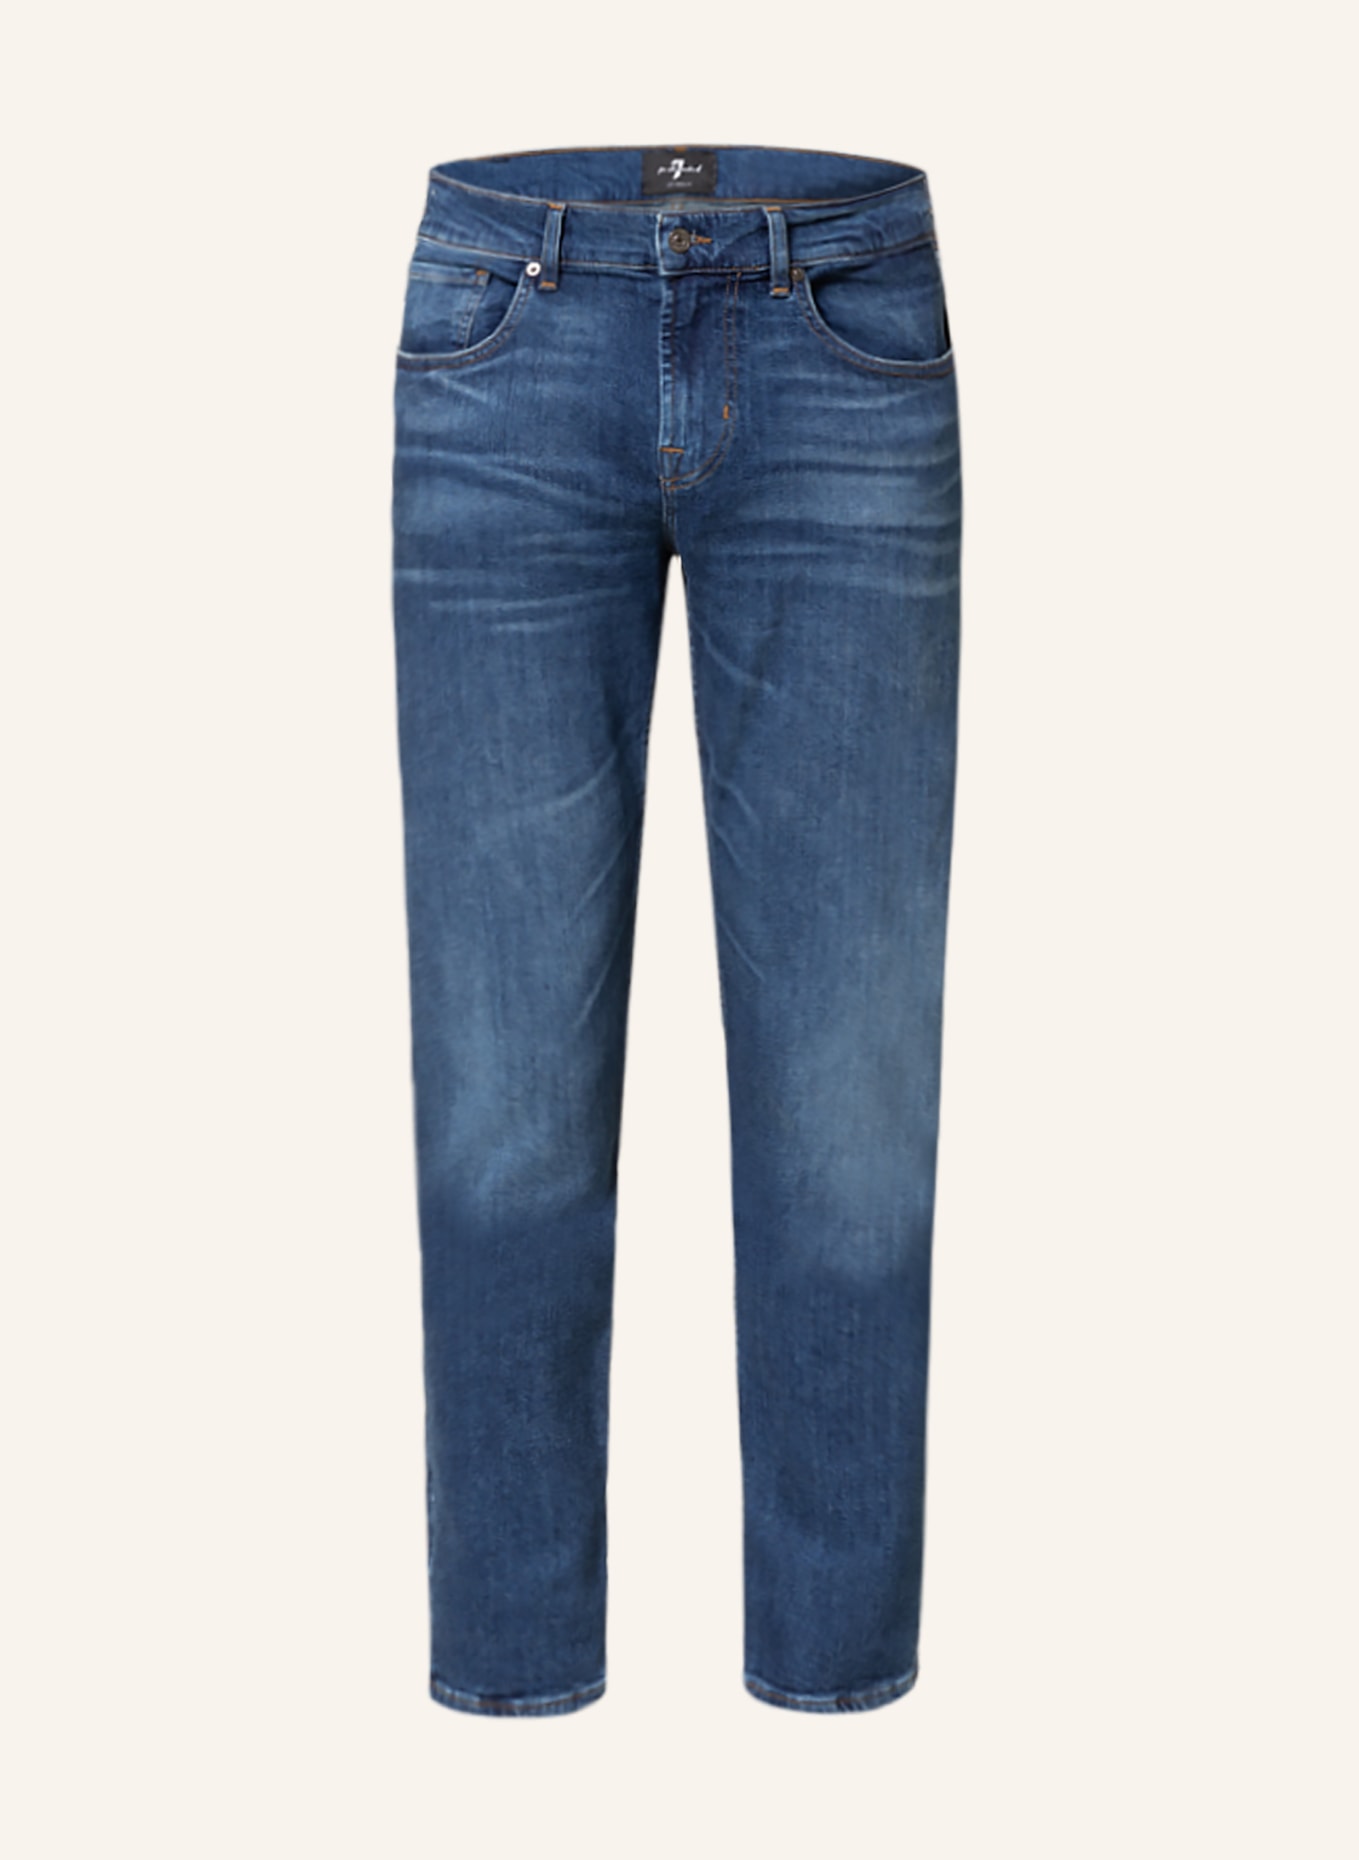 7 for all mankind Jeans Tapered Fit, Farbe: DARK BLUE (Bild 1)